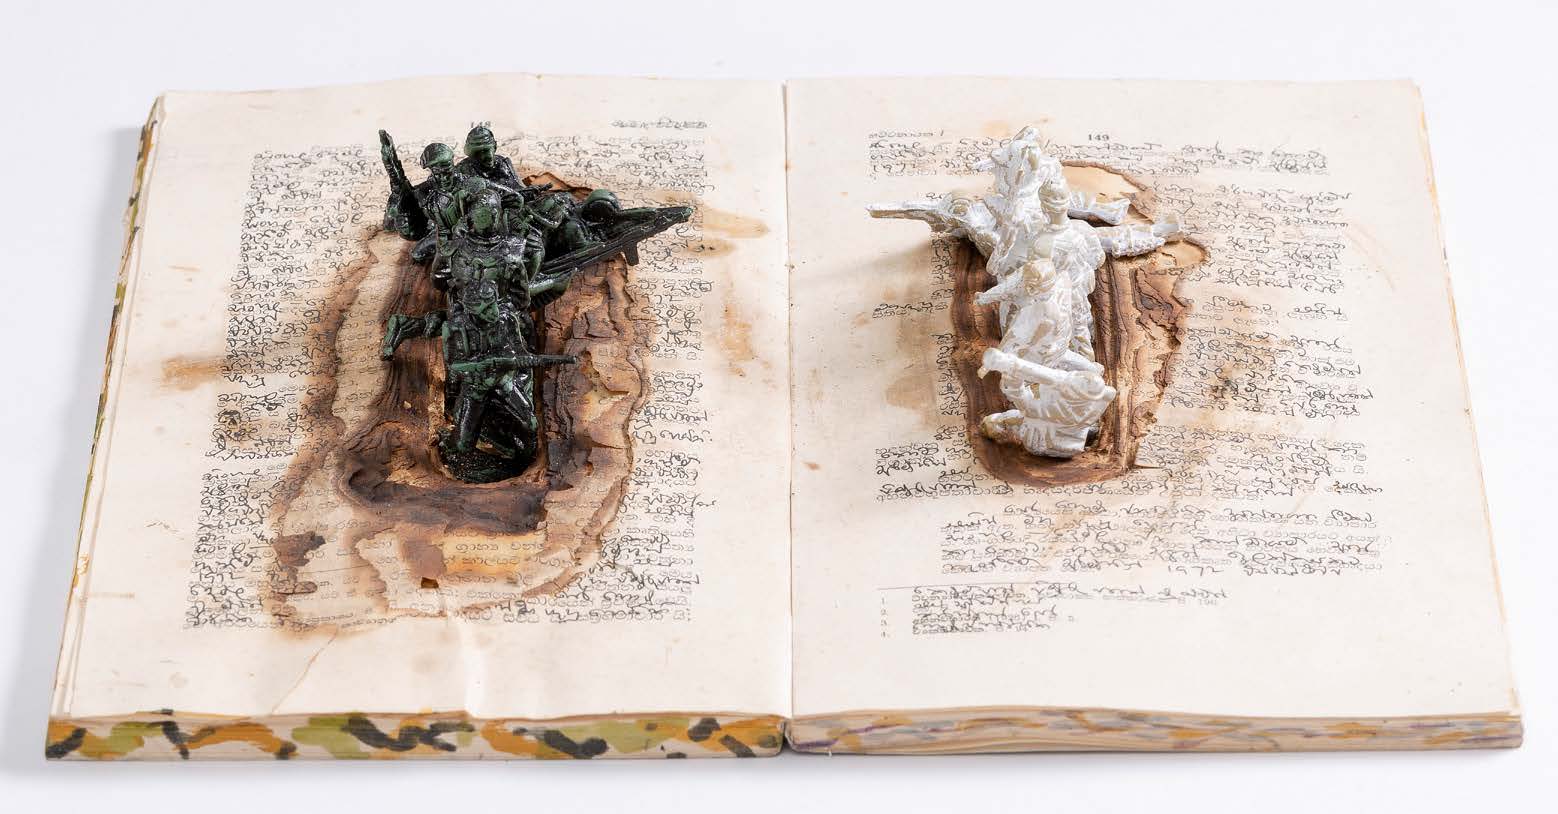 Kingsley Gunatillake, book art, Used books and toy soldiers